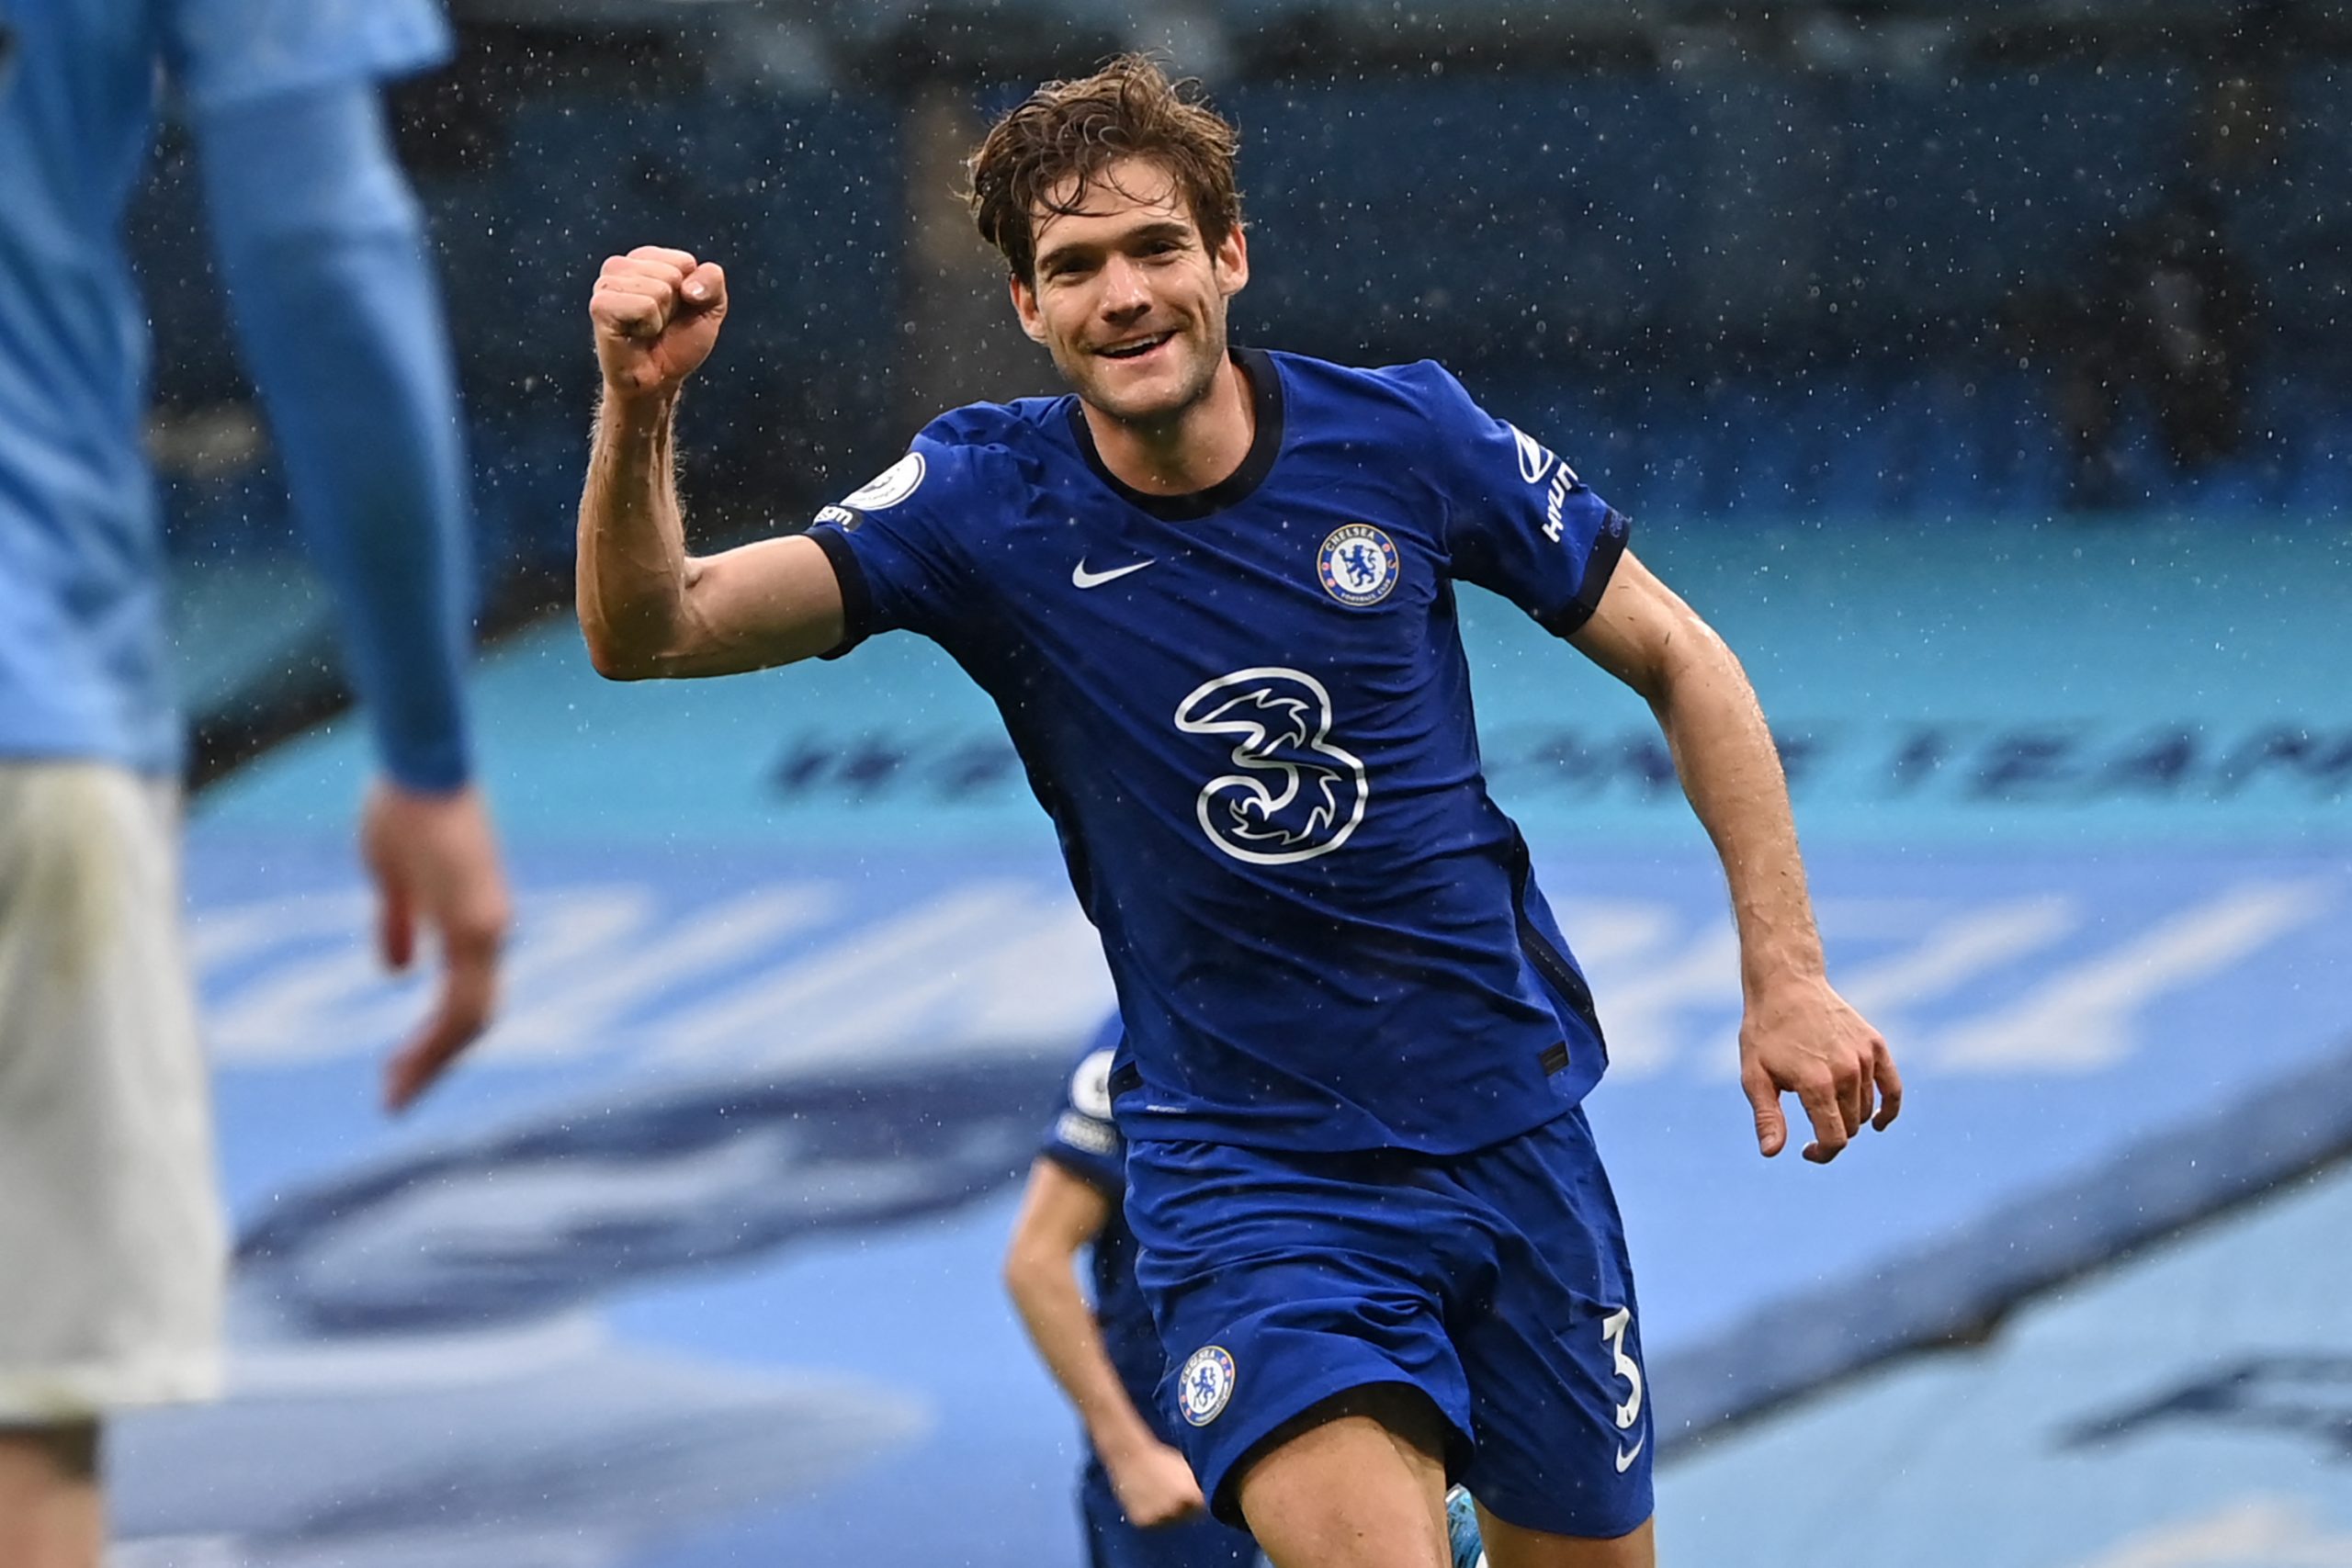 Chelsea's Spanish defender Marcos Alonso celebrates after scoring their second goal during the English Premier League football match between Manchester City and Chelsea at the Etihad Stadium in Manchester, north west England, on May 8, 2021. - RESTRICTED TO EDITORIAL USE. No use with unauthorized audio, video, data, fixture lists, club/league logos or 'live' services. Online in-match use limited to 120 images. An additional 40 images may be used in extra time. No video emulation. Social media in-match use limited to 120 images. An additional 40 images may be used in extra time. No use in betting publications, games or single club/league/player publications. (Photo by Shaun Botterill / POOL / AFP) / RESTRICTED TO EDITORIAL USE. No use with unauthorized audio, video, data, fixture lists, club/league logos or 'live' services. Online in-match use limited to 120 images. An additional 40 images may be used in extra time. No video emulation. Social media in-match use limited to 120 images. An additional 40 images may be used in extra time. No use in betting publications, games or single club/league/player publications. / RESTRICTED TO EDITORIAL USE. No use with unauthorized audio, video, data, fixture lists, club/league logos or 'live' services. Online in-match use limited to 120 images. An additional 40 images may be used in extra time. No video emulation. Social media in-match use limited to 120 images. An additional 40 images may be used in extra time. No use in betting publications, games or single club/league/player publications. (Photo by SHAUN BOTTERILL/POOL/AFP via Getty Images)The 4th Official uses images provided by the following image agency:
Getty Images (https://www.gettyimages.de/)
Imago Images (https://www.imago-images.de/)